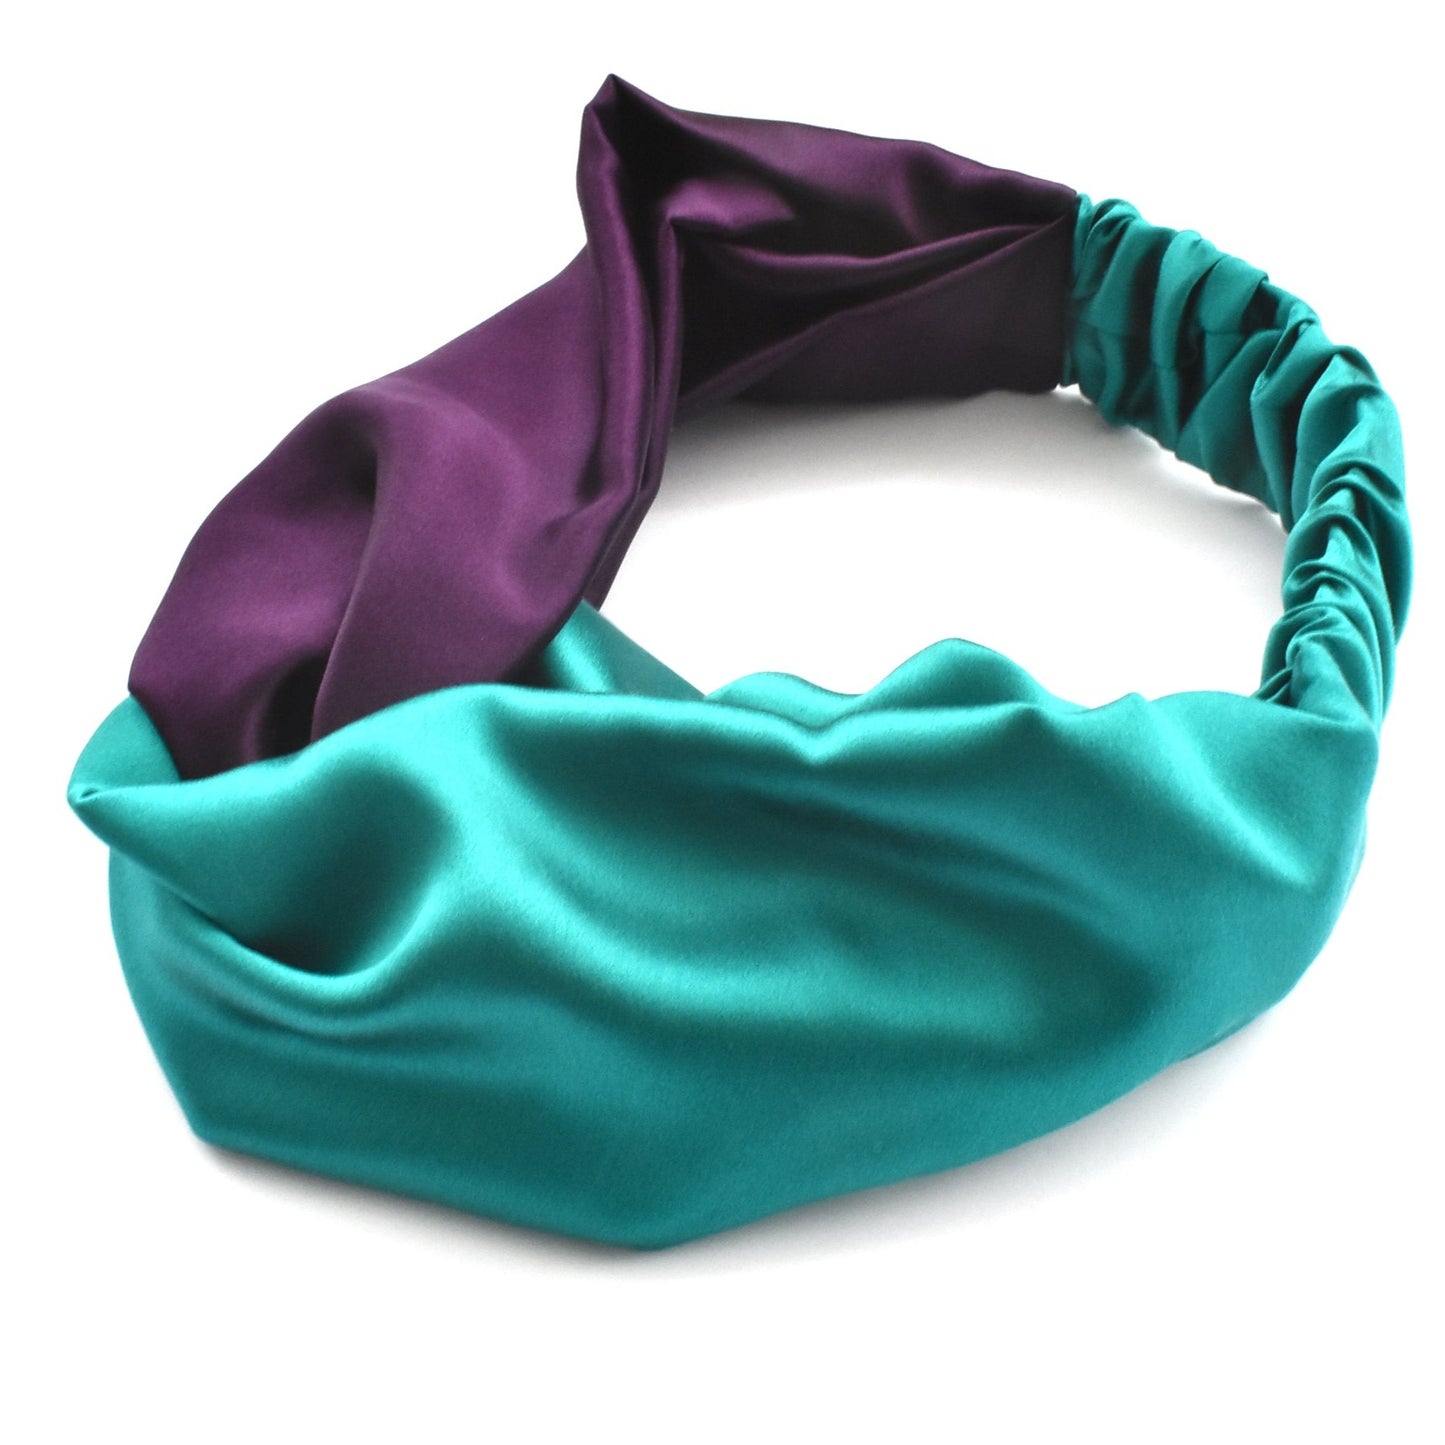 Aubergine & Turquoise Split Twisted Turban hairband and neck scarf in Mulberry Silk - 100% pure silk satin